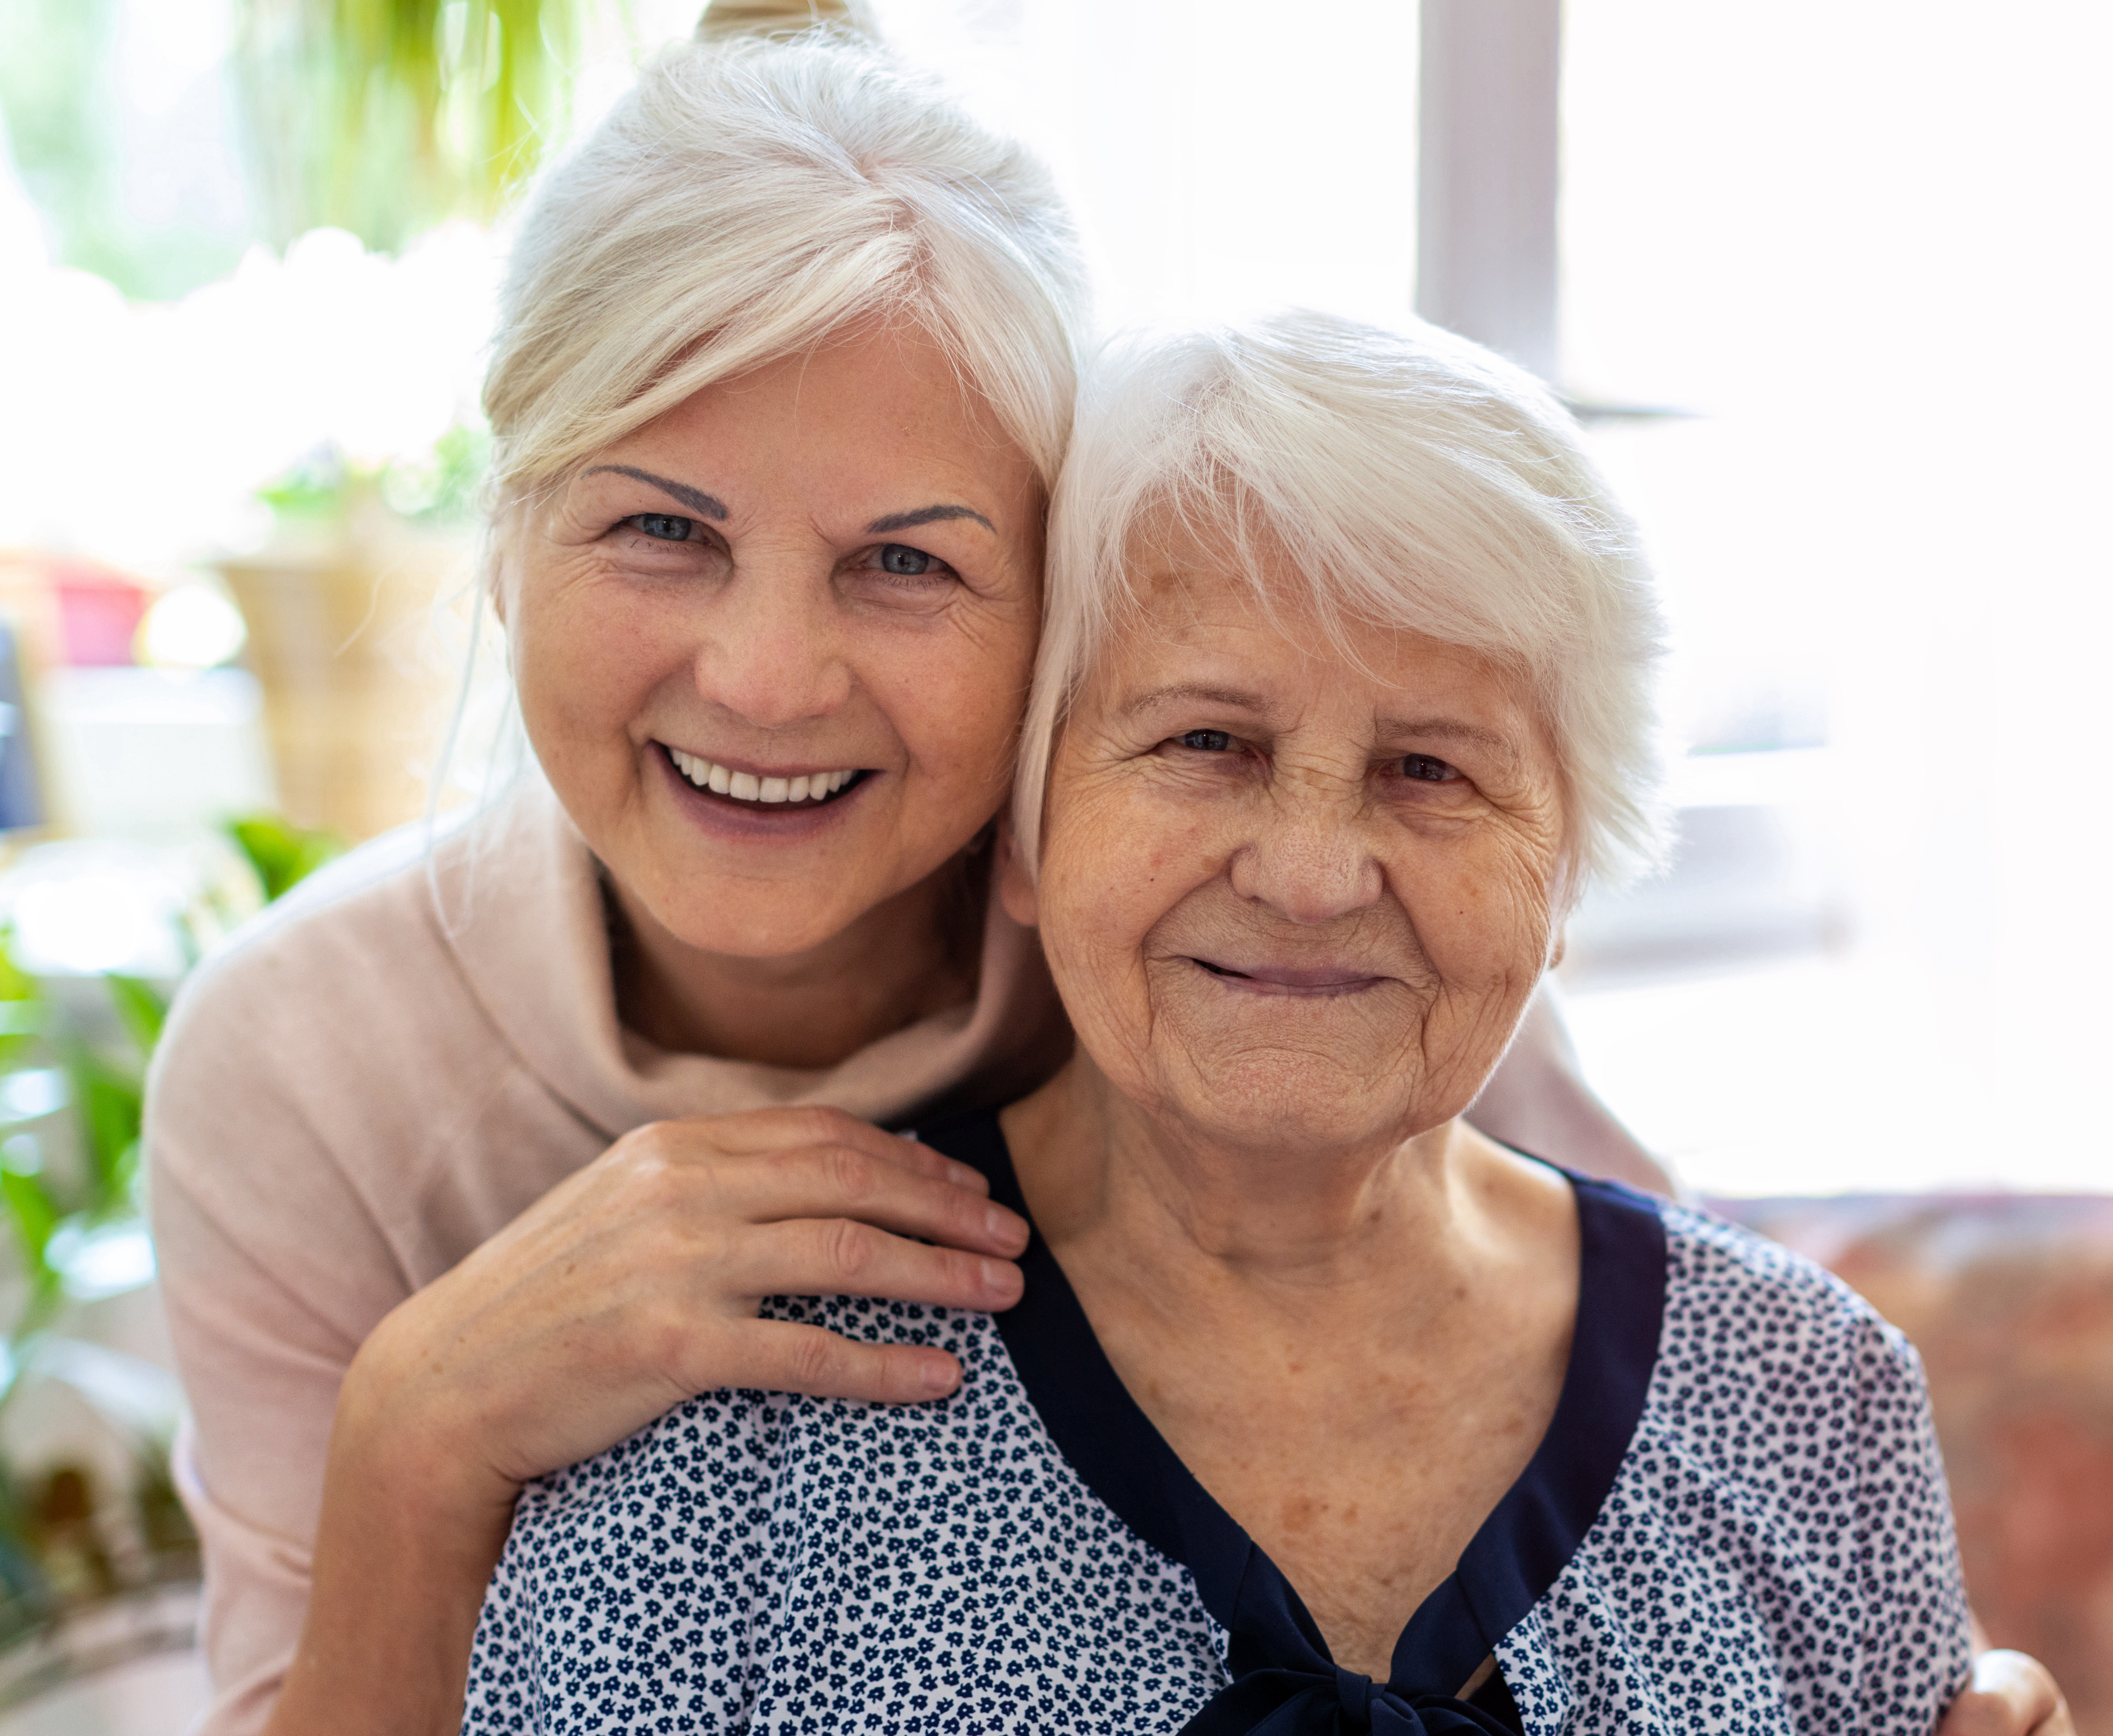 5 Tips for New Residents Transitioning into Assisted Living